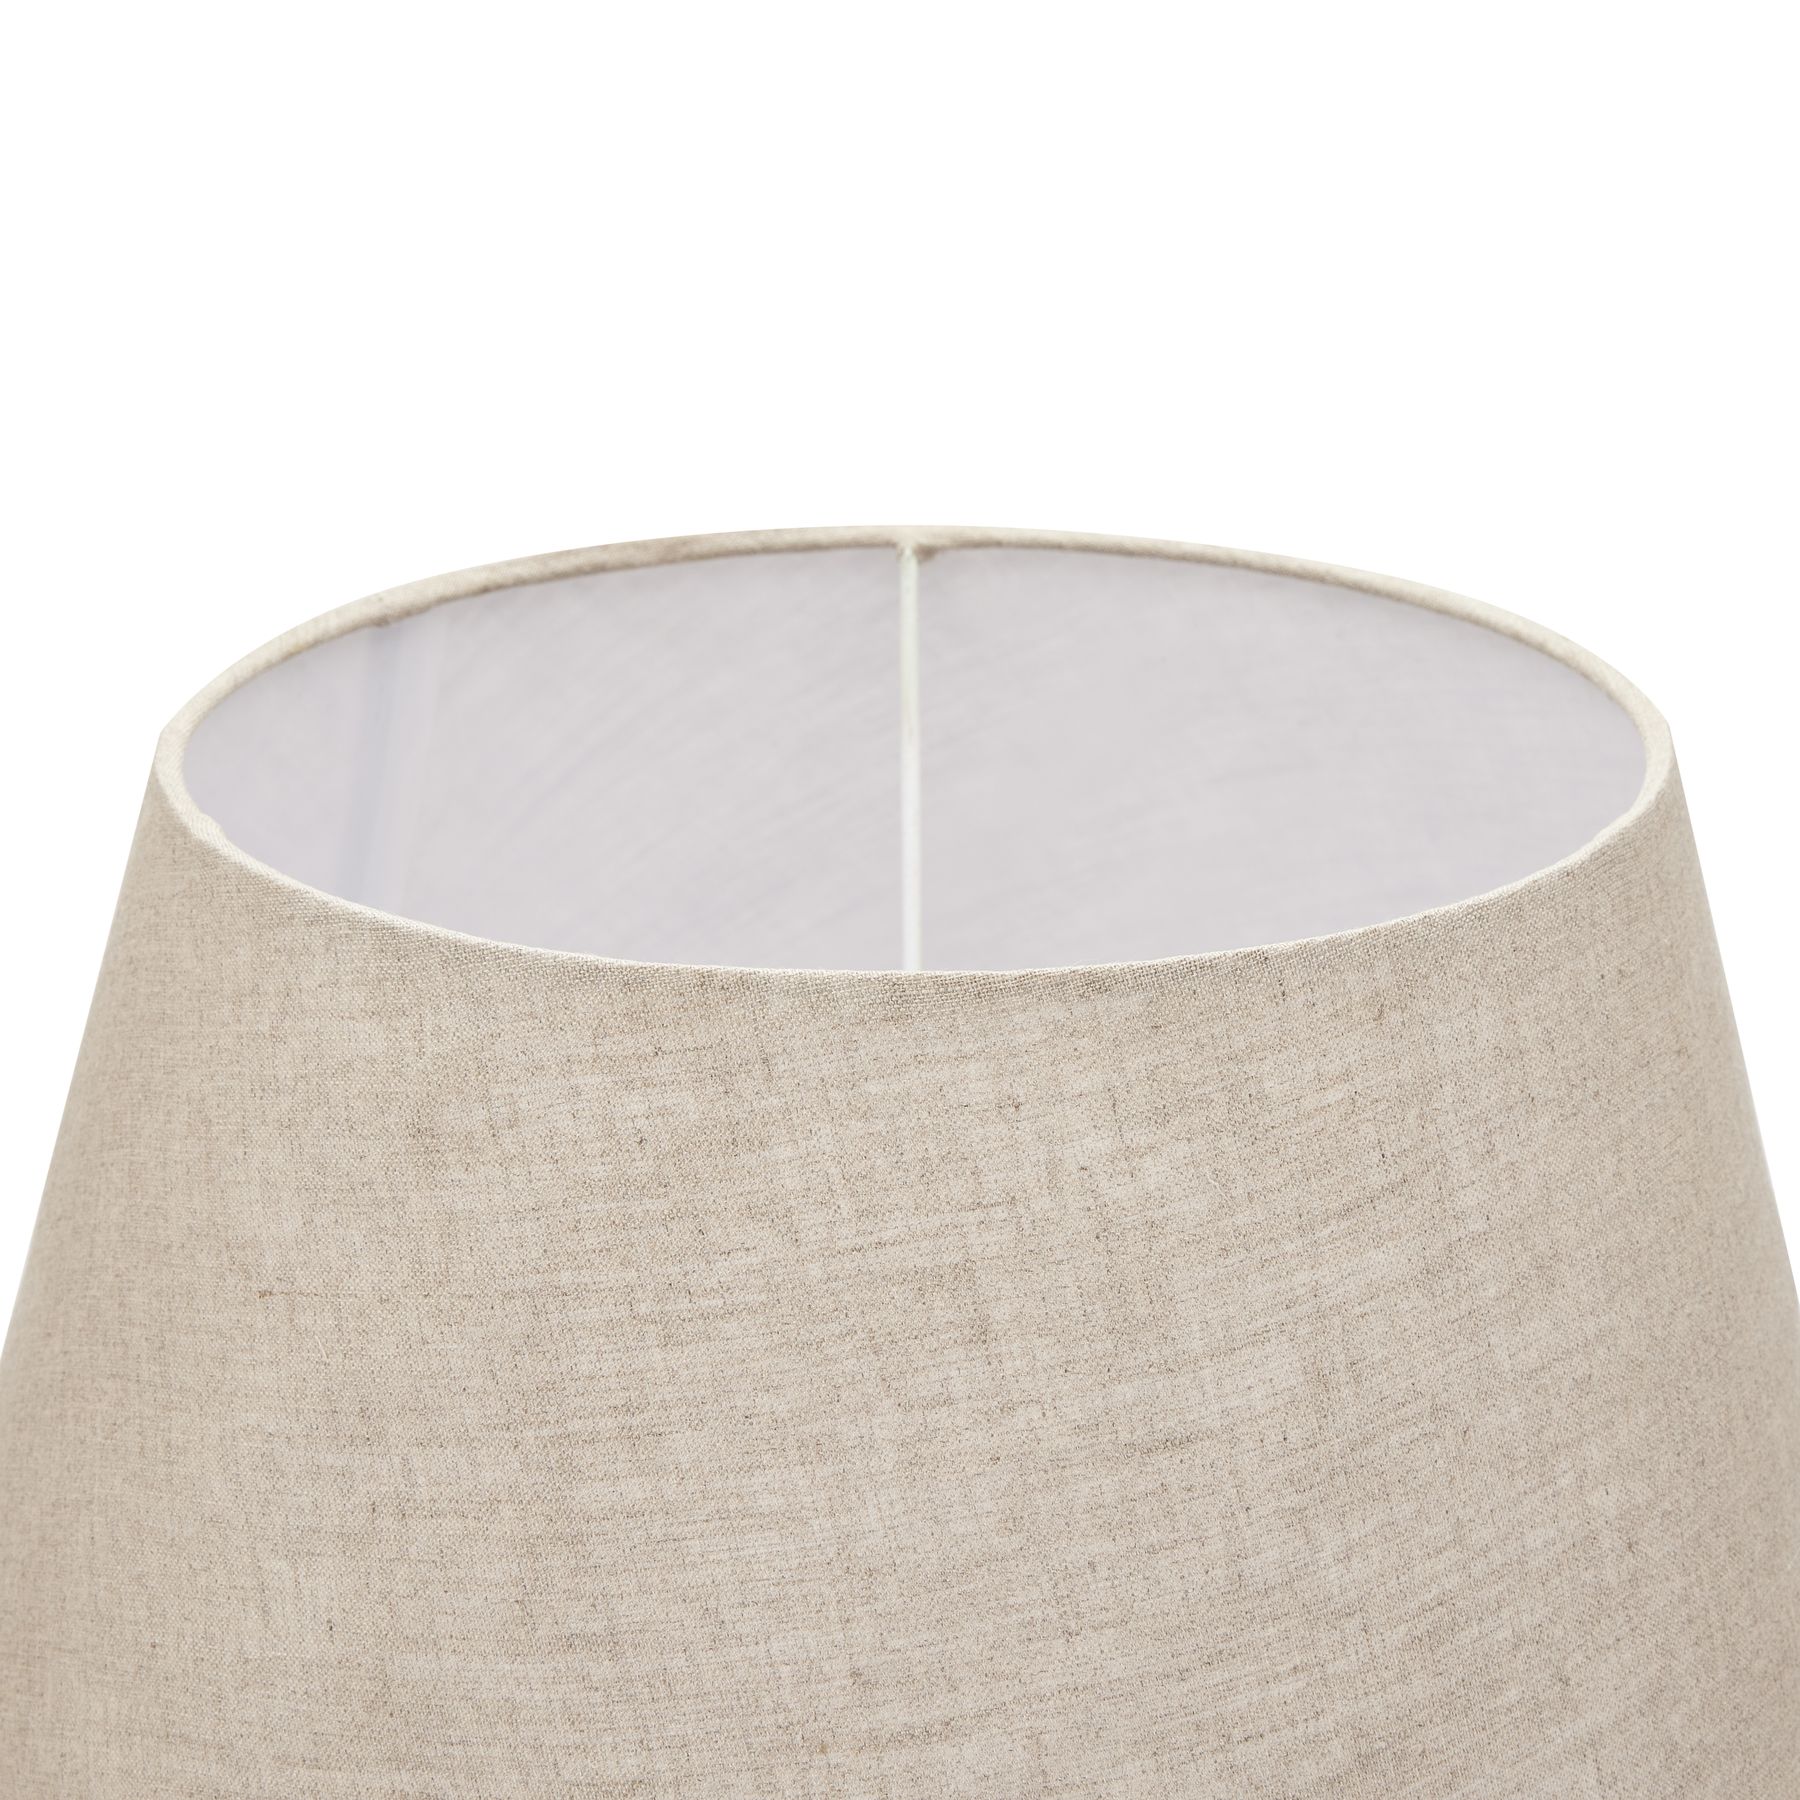 Delaney Grey Goblet Candlestick Lamp With Linen Shade - Image 3